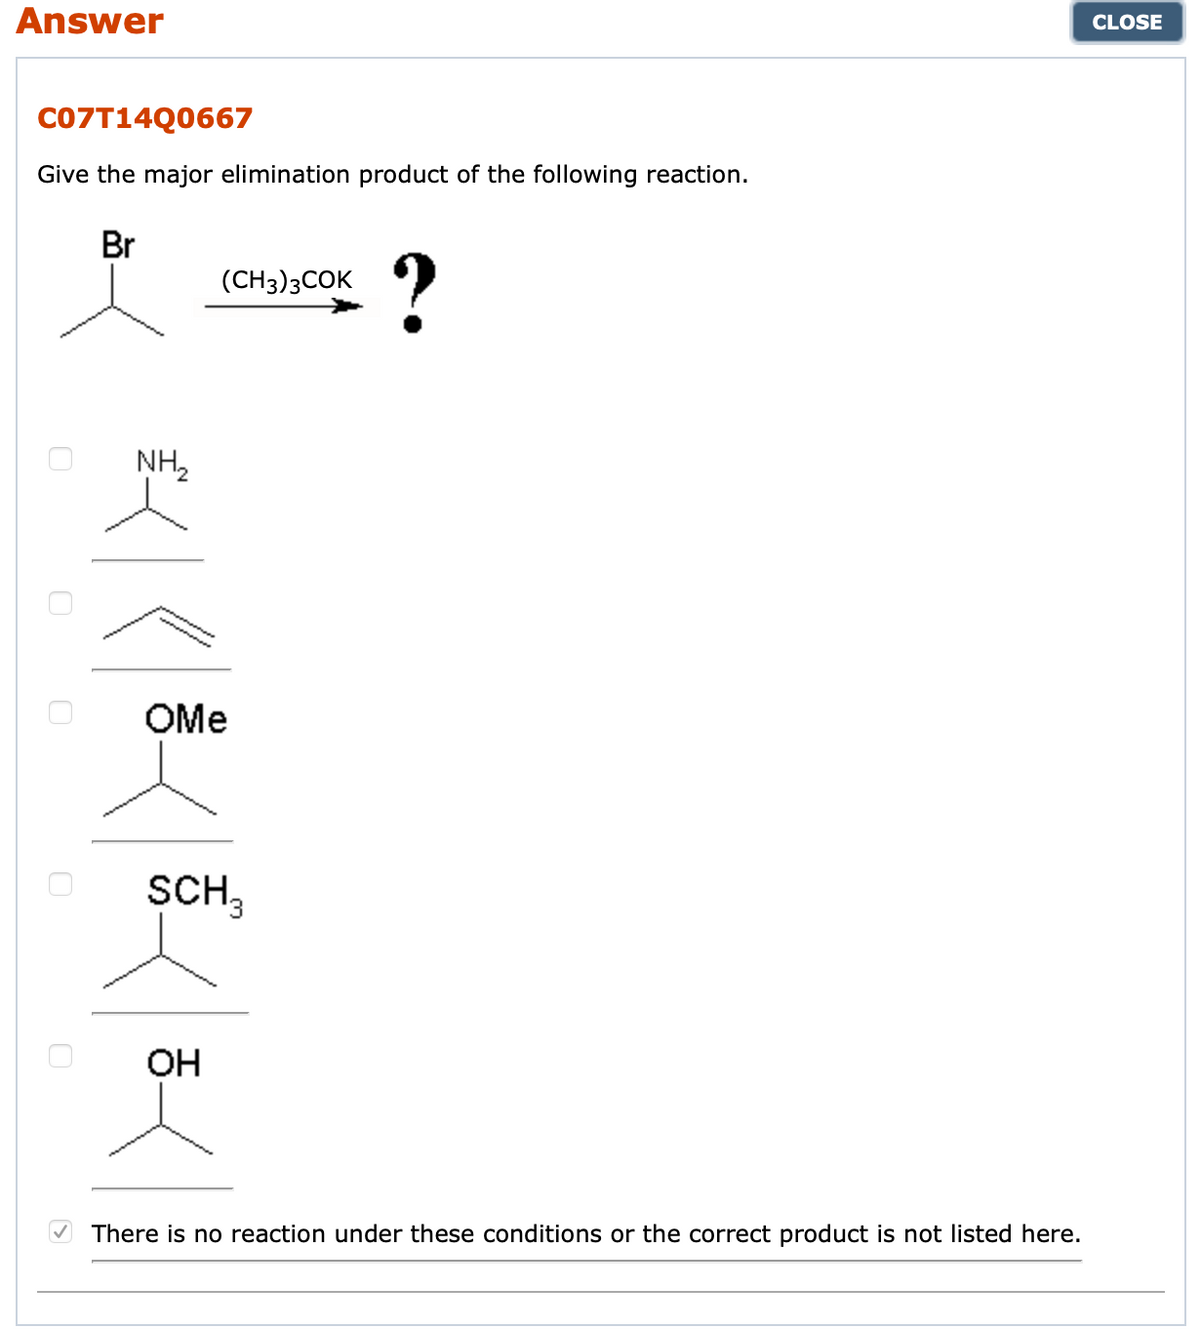 Answer
CLOSE
CO7T14Q0667
Give the major elimination product of the following reaction.
Br
?
(CH3)3COK
NH,
OMe
SCH,
OH
There is no reaction under these conditions or the correct product is not listed here.
